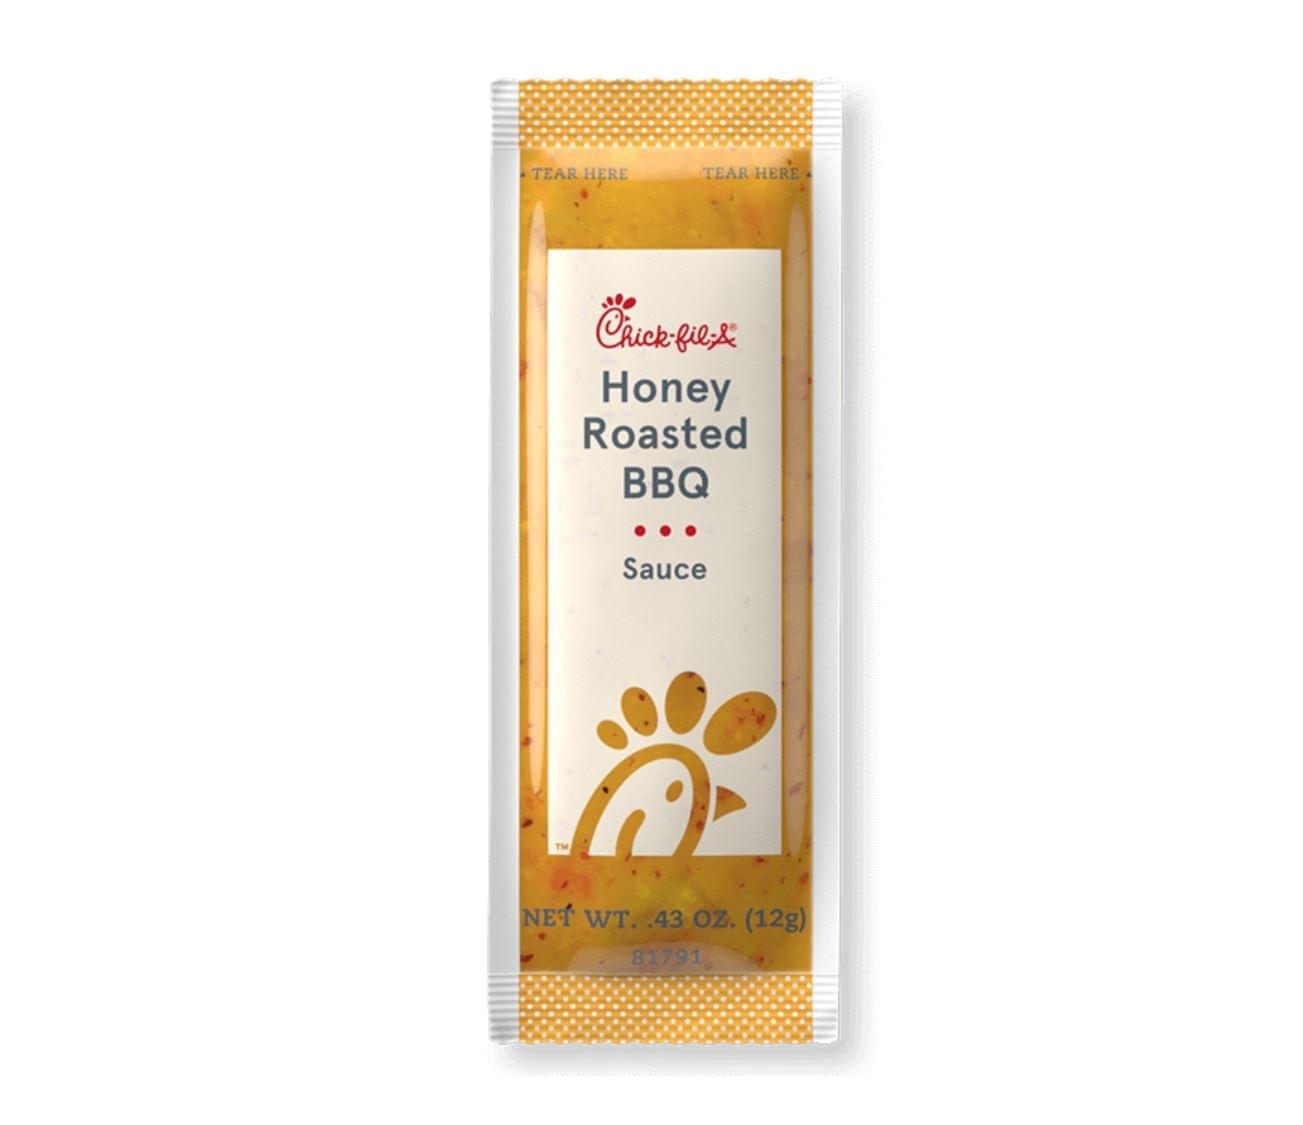 Chick-fil-A Honey Roasted BBQ Sauce Nutrition Facts